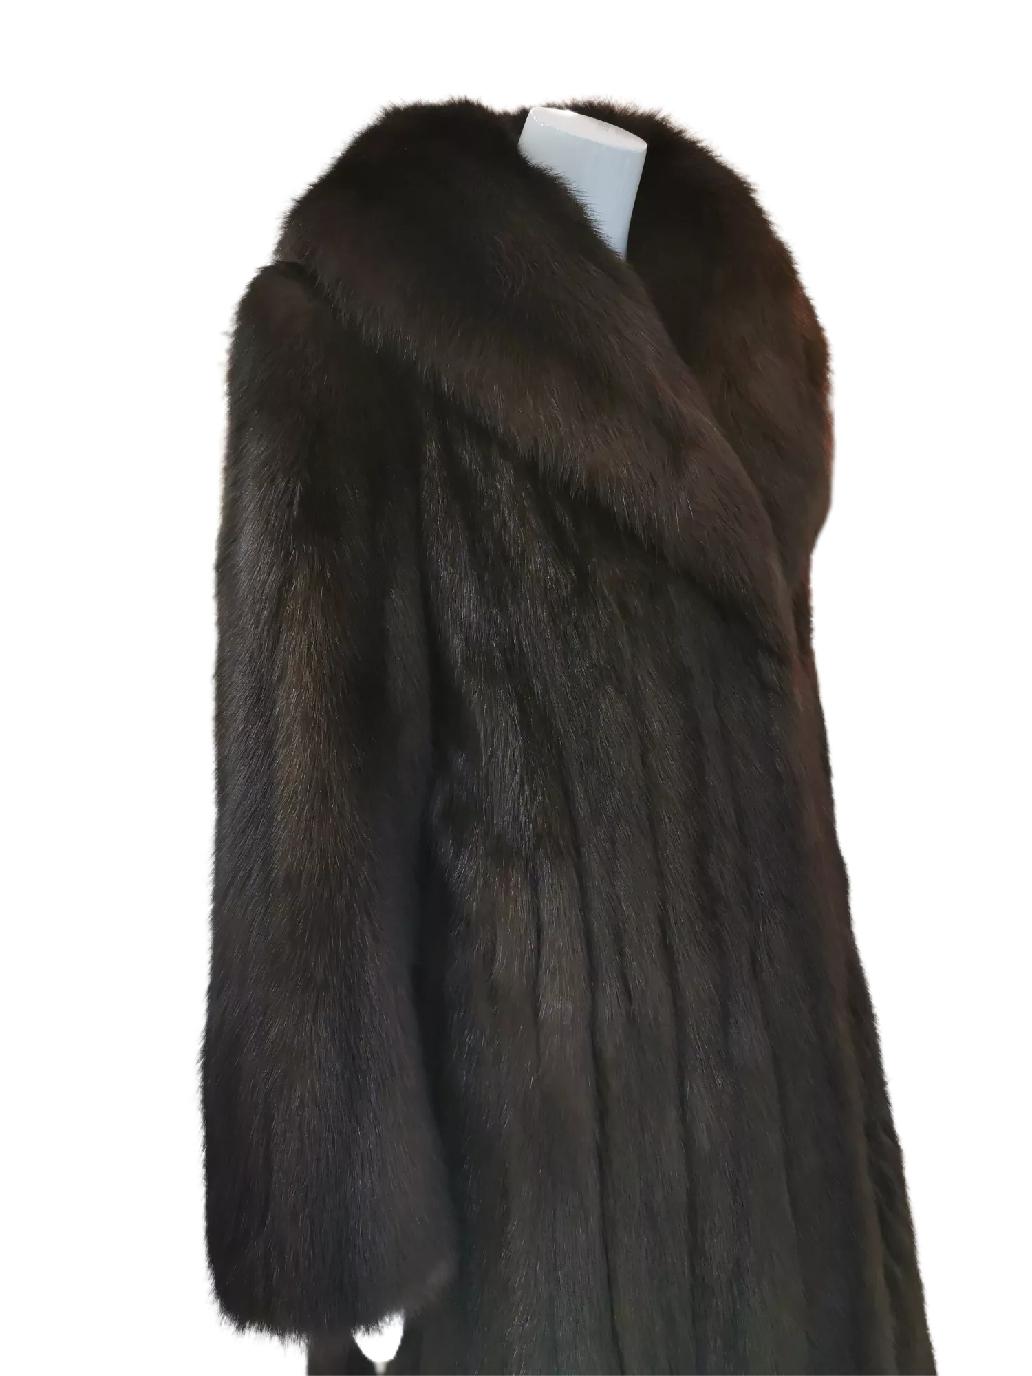 Louis Féraud Barguzin Russian Sable Fur Coat (Size 8-M) In Excellent Condition For Sale In Montreal, Quebec